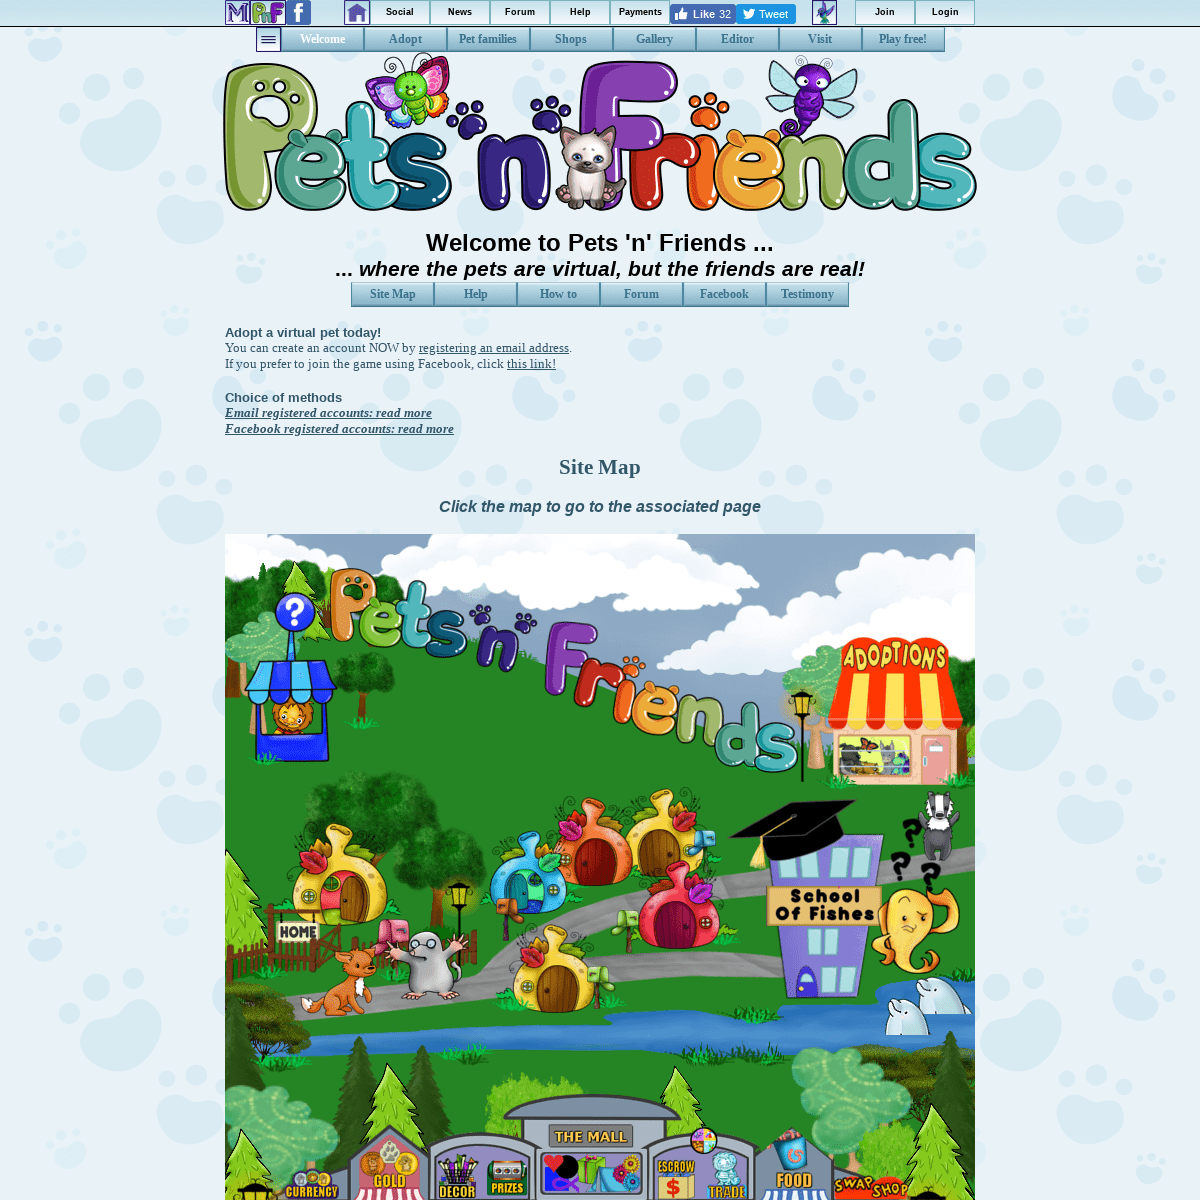 Welcome to Pets 'n' Friends!